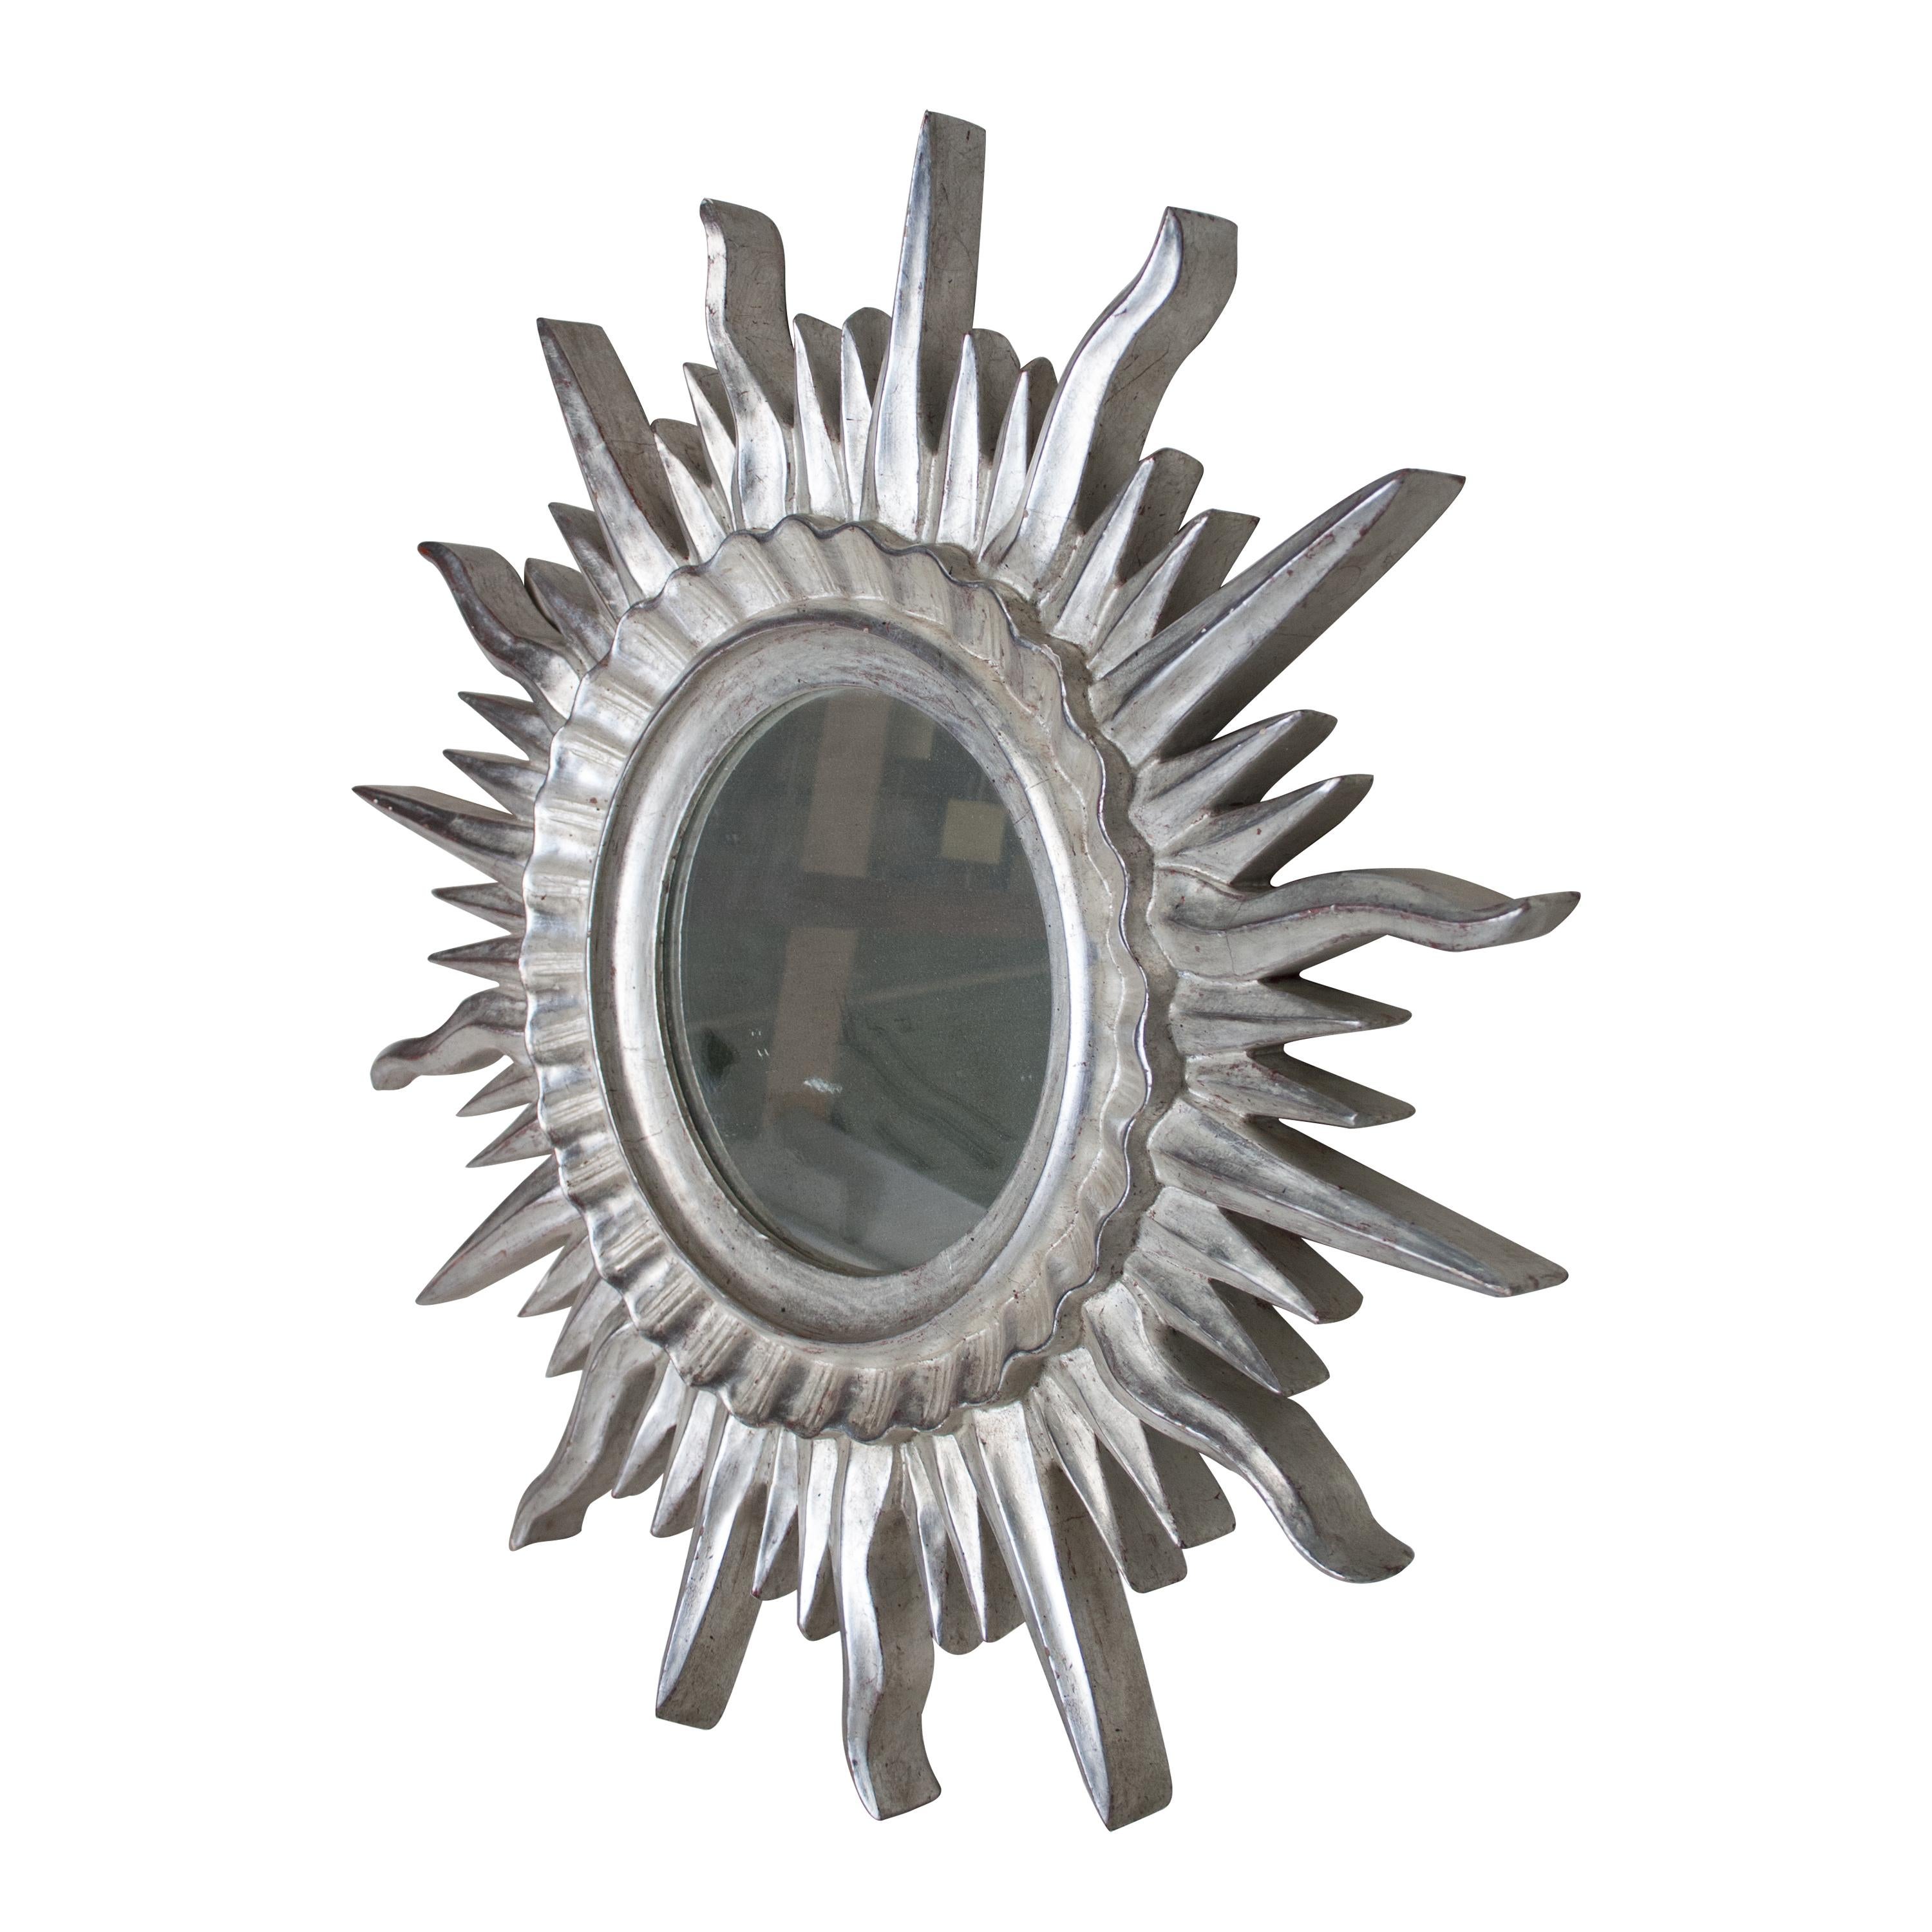 French mirror in the form of sun carved by polychrome hand finished in a silver bath.